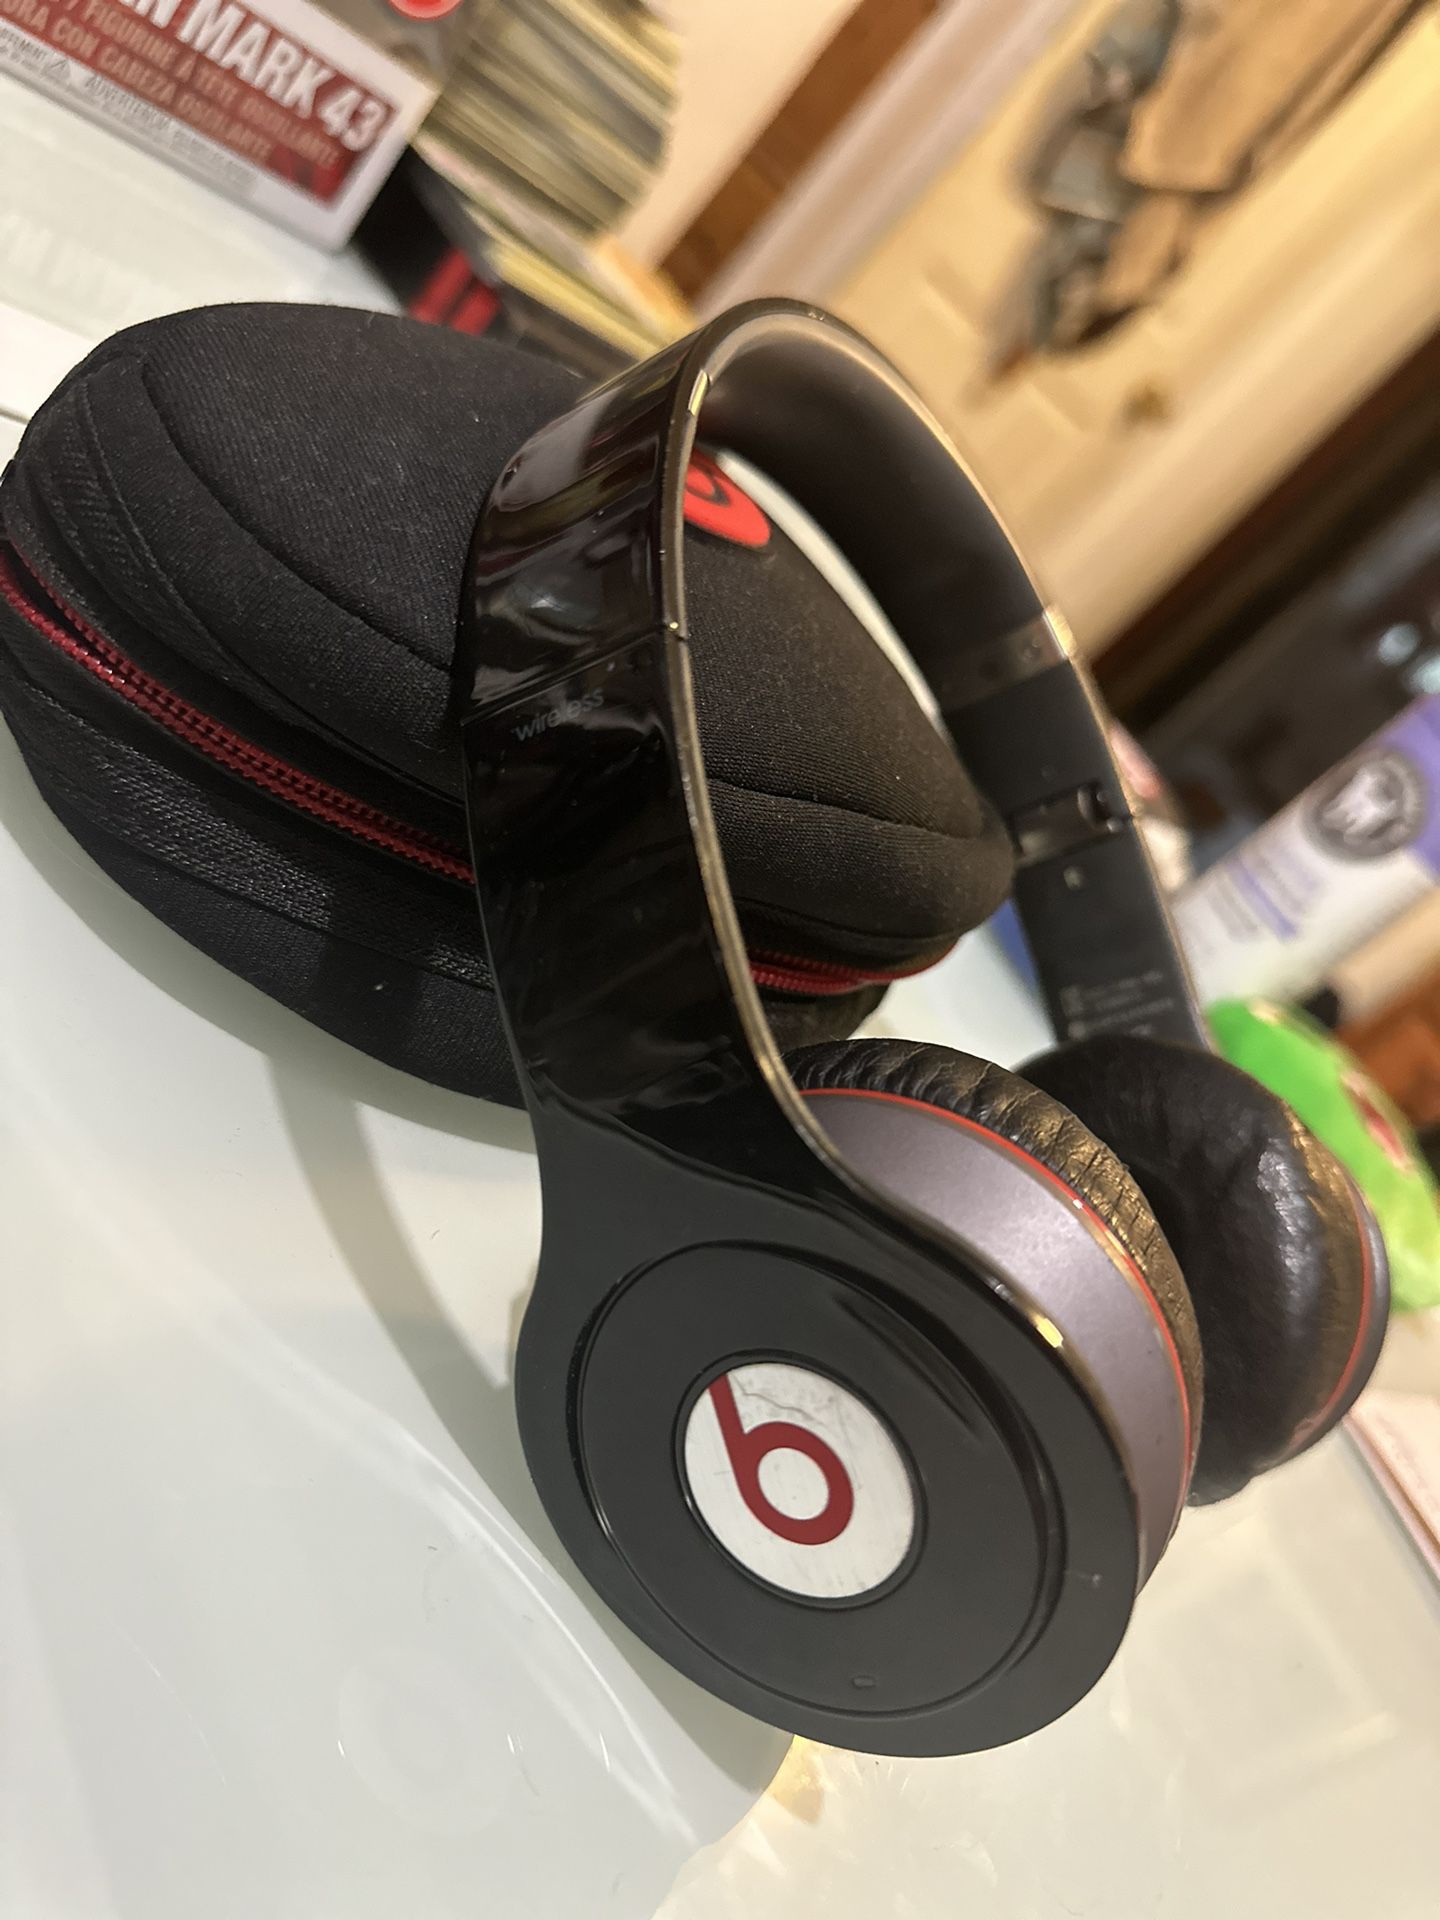 Beats By Dre (Used)